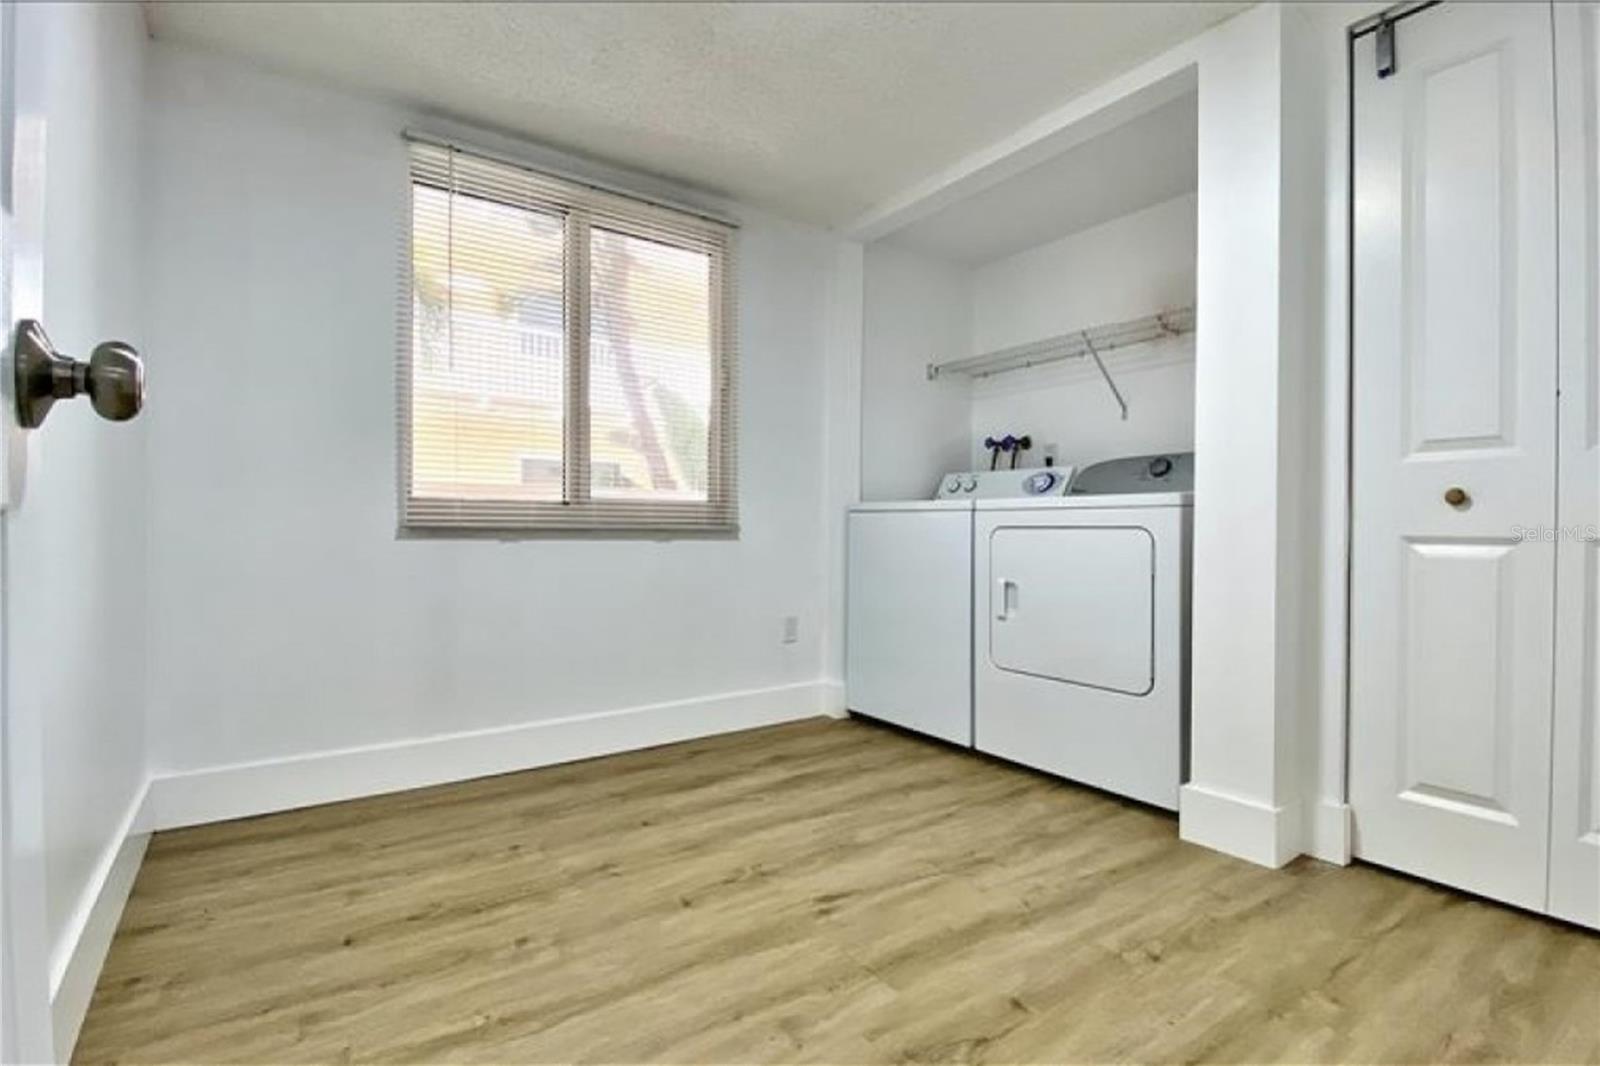 Large storage/laundry room is inside the condo just off the kitchen